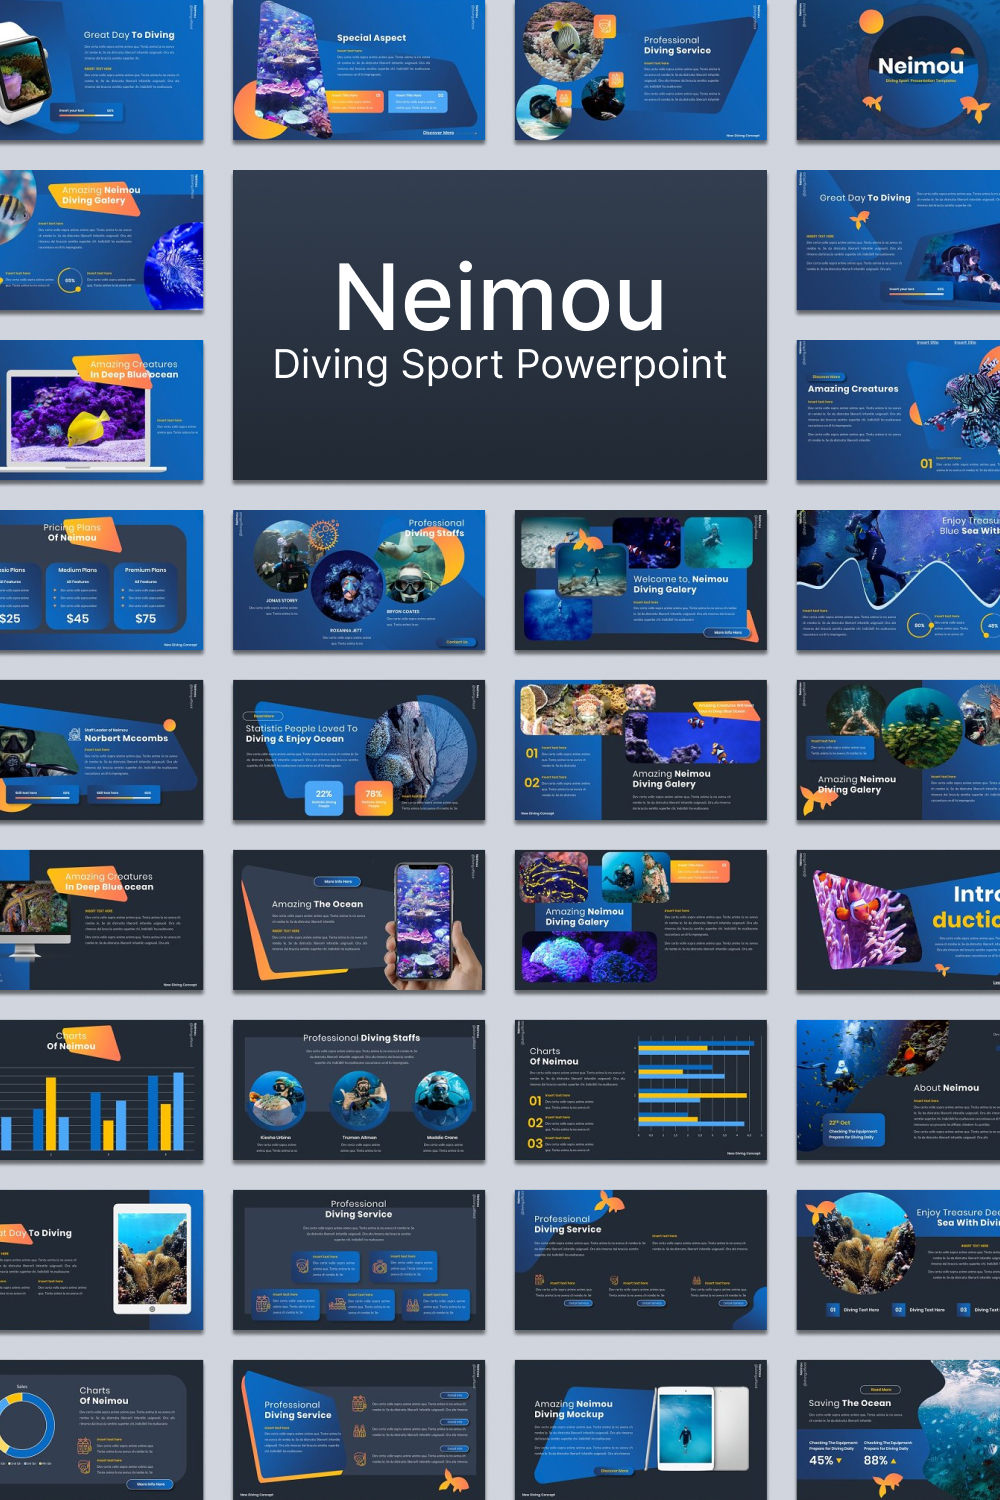 neimou diving sport powerpoint 03